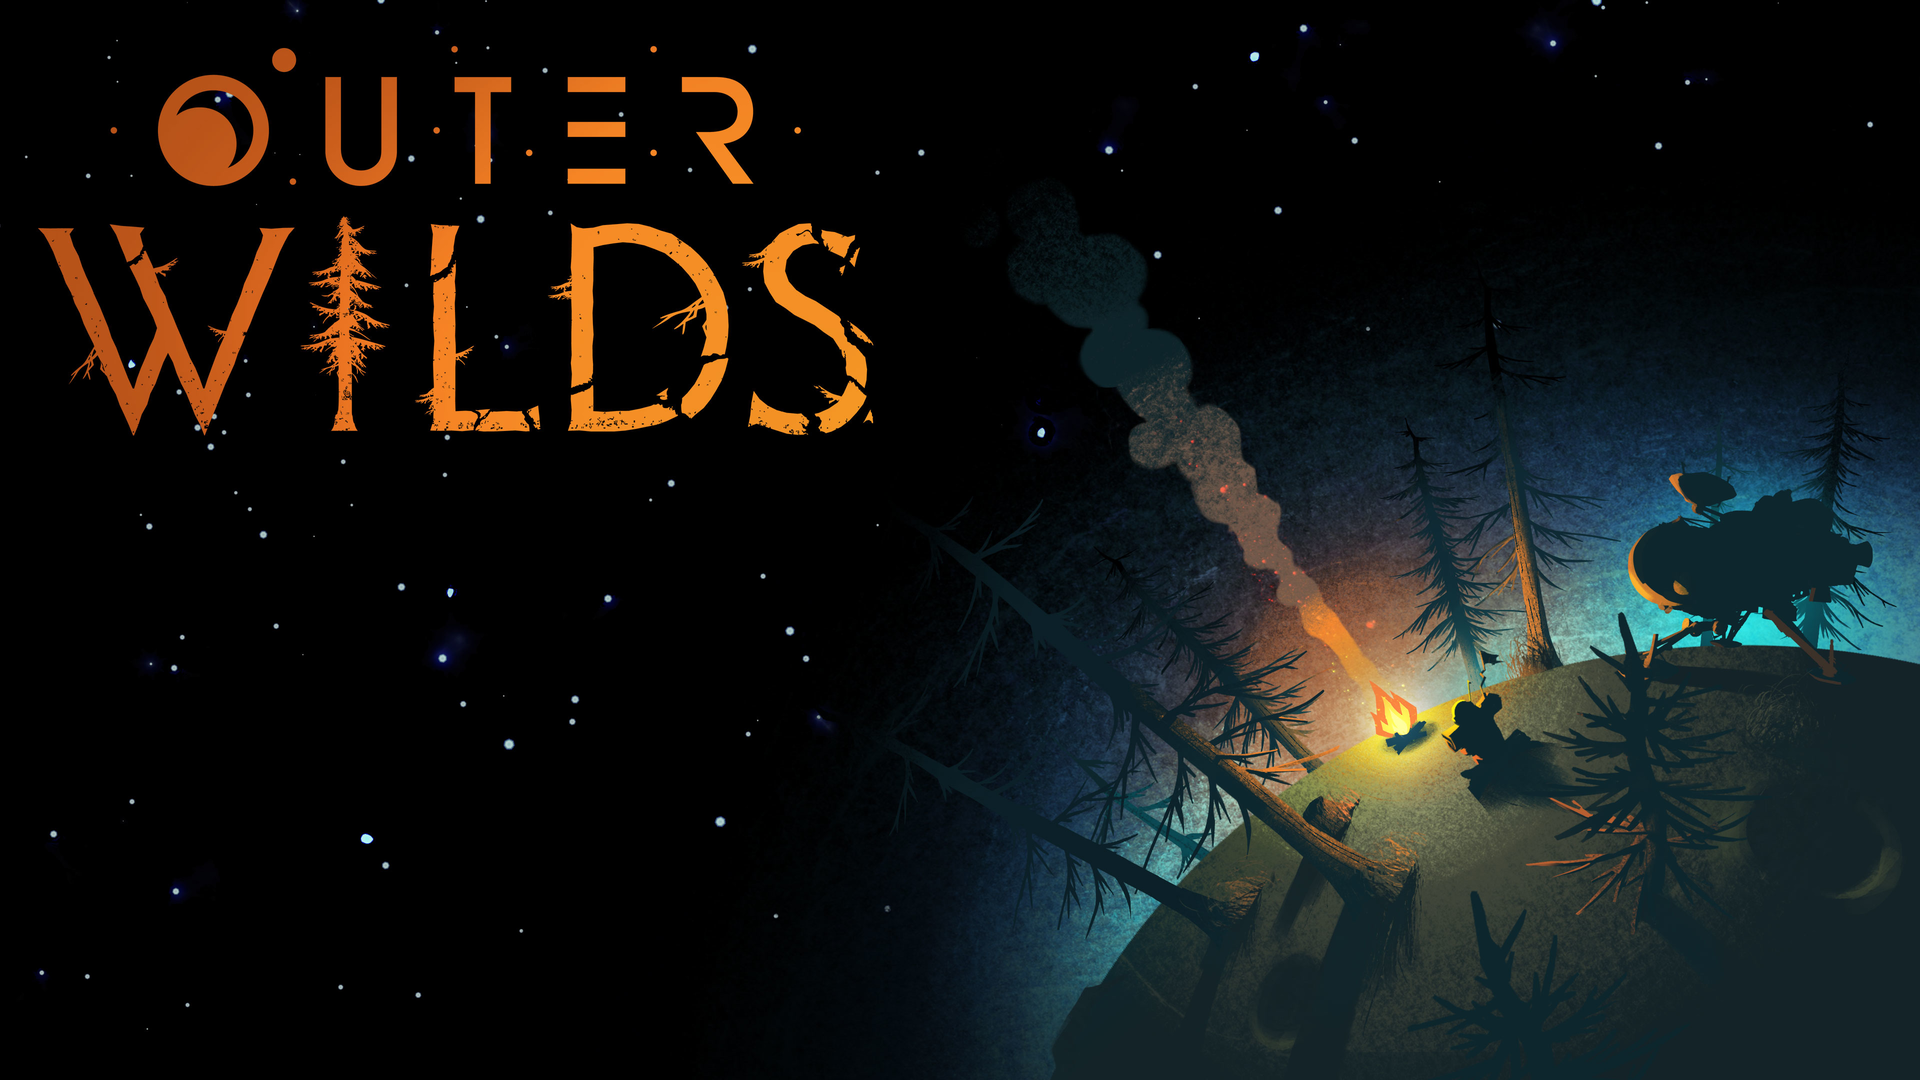 PlayStation Now games for April: Outer Wilds, WRC 10 FIA World Rally  Championship, Journey to the Savage Planet – PlayStation.Blog